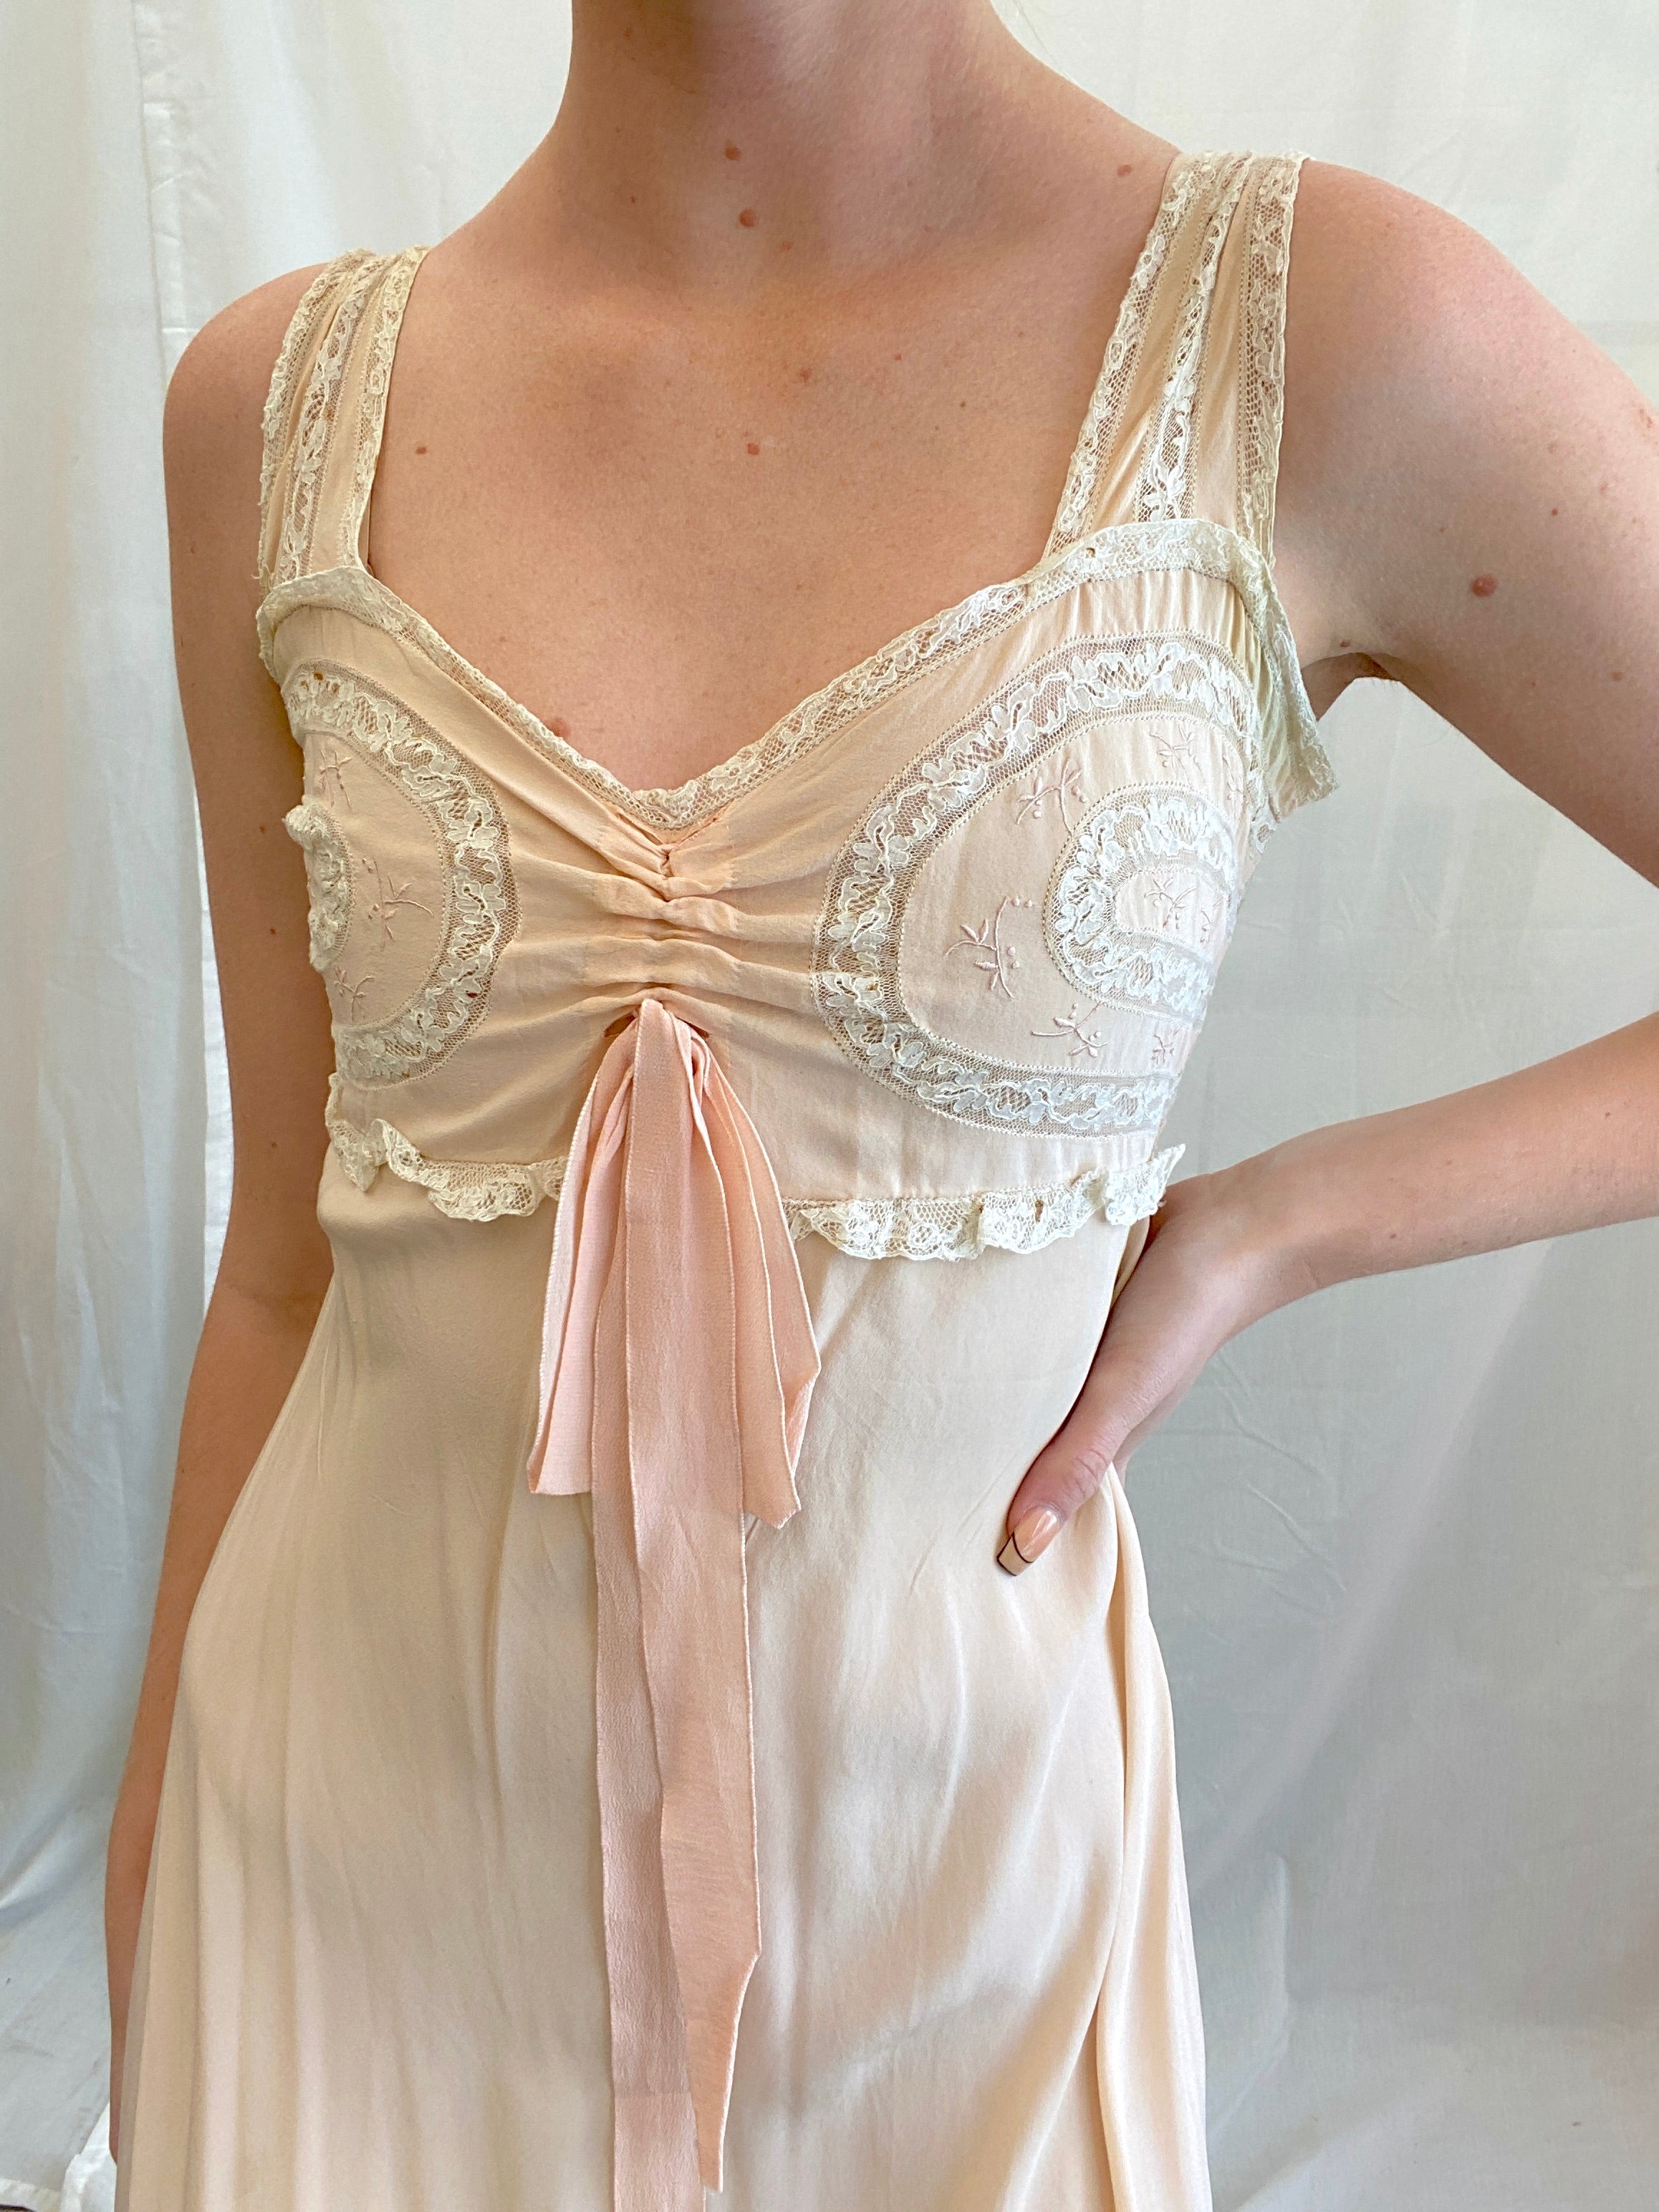 1930's Pale Pink Silk Slip with White Lace